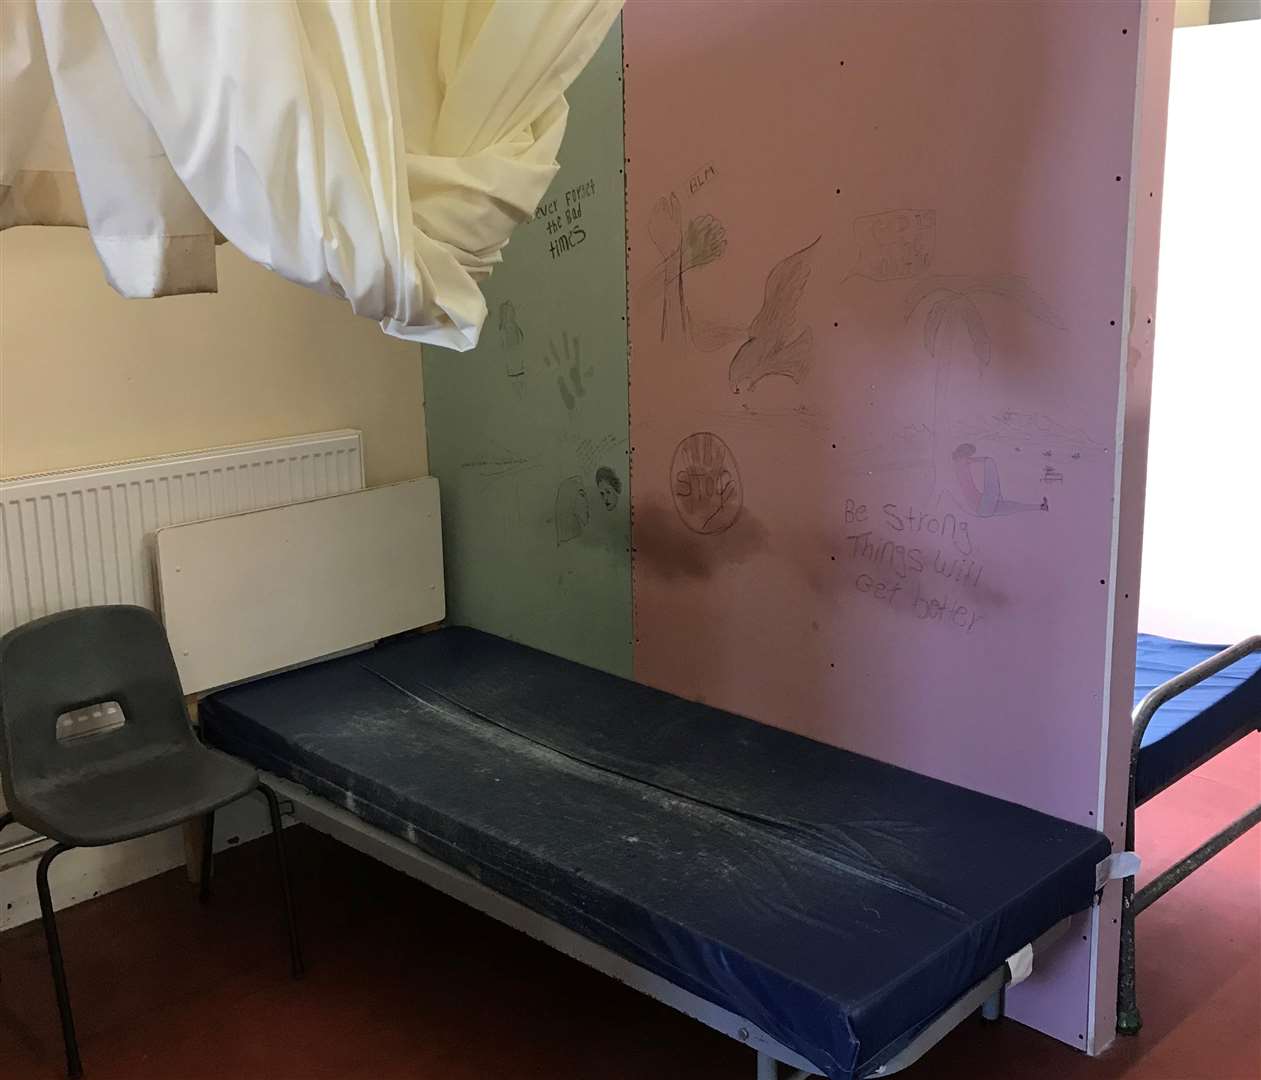 Some areas were described as 'filthy' during one inspection. Picture: Independent Chief Inspector of Borders and Immigration